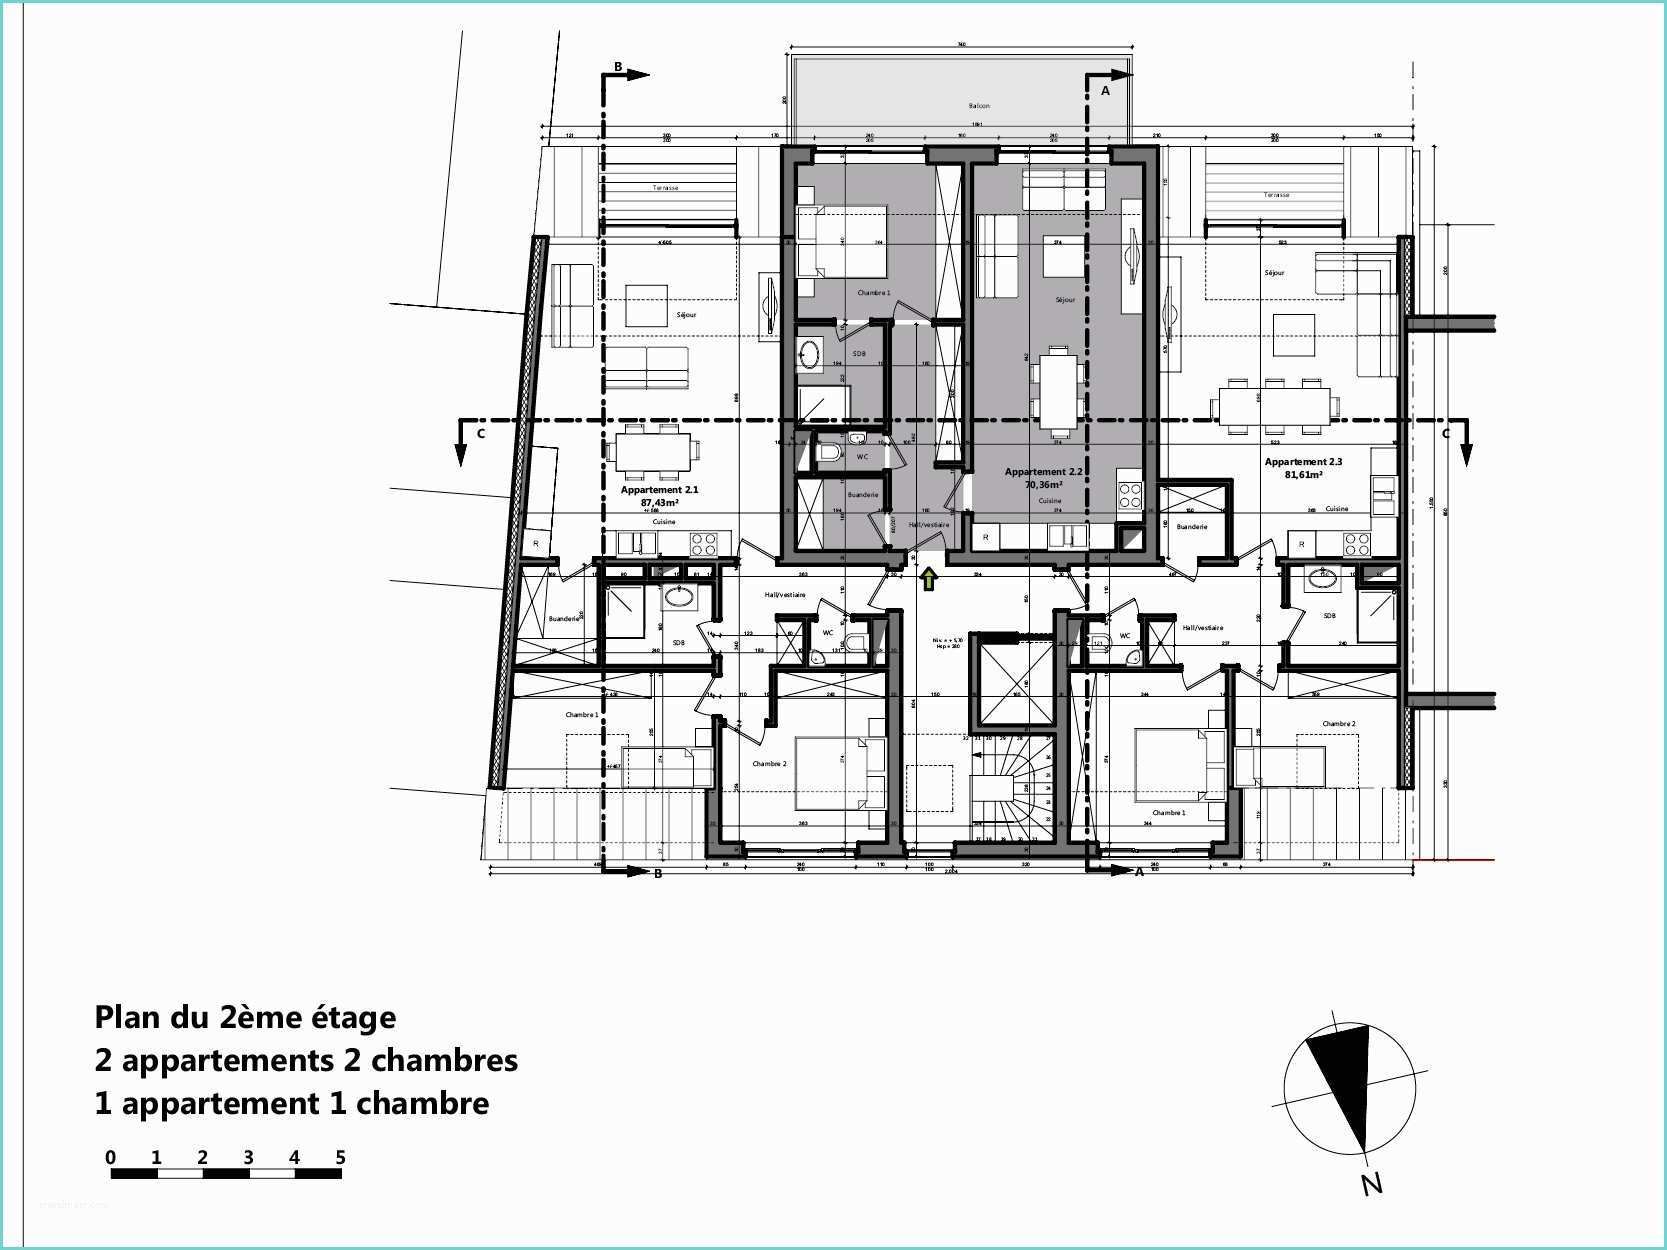 Plan Appartement 2 Chambres Plan Appartement 2 Chambres Val Duoise Appartement